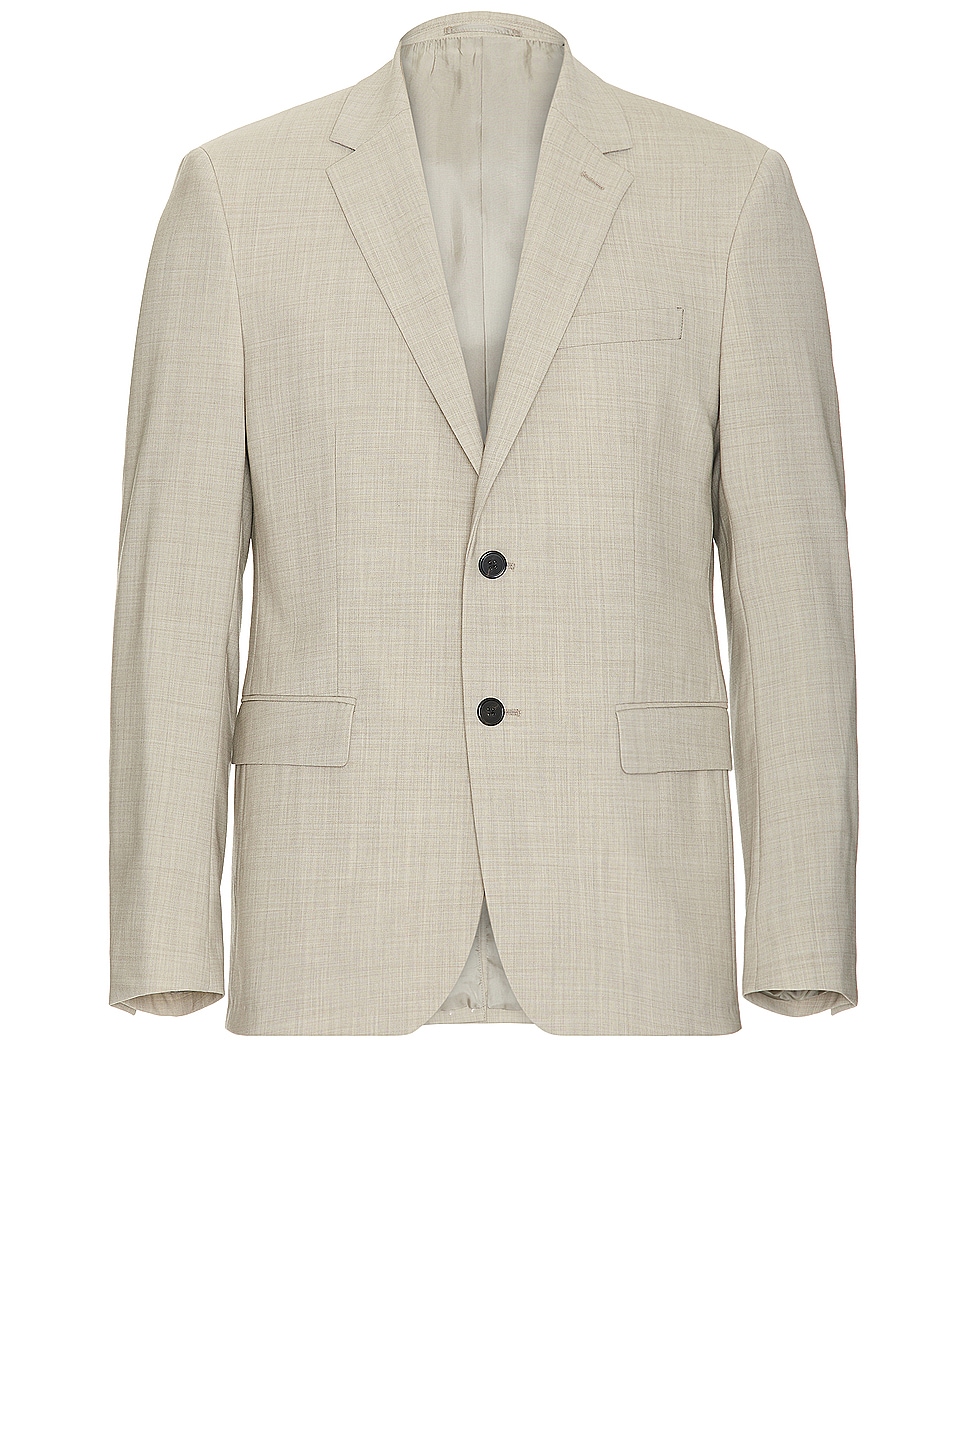 Chambers Jacket in Nude